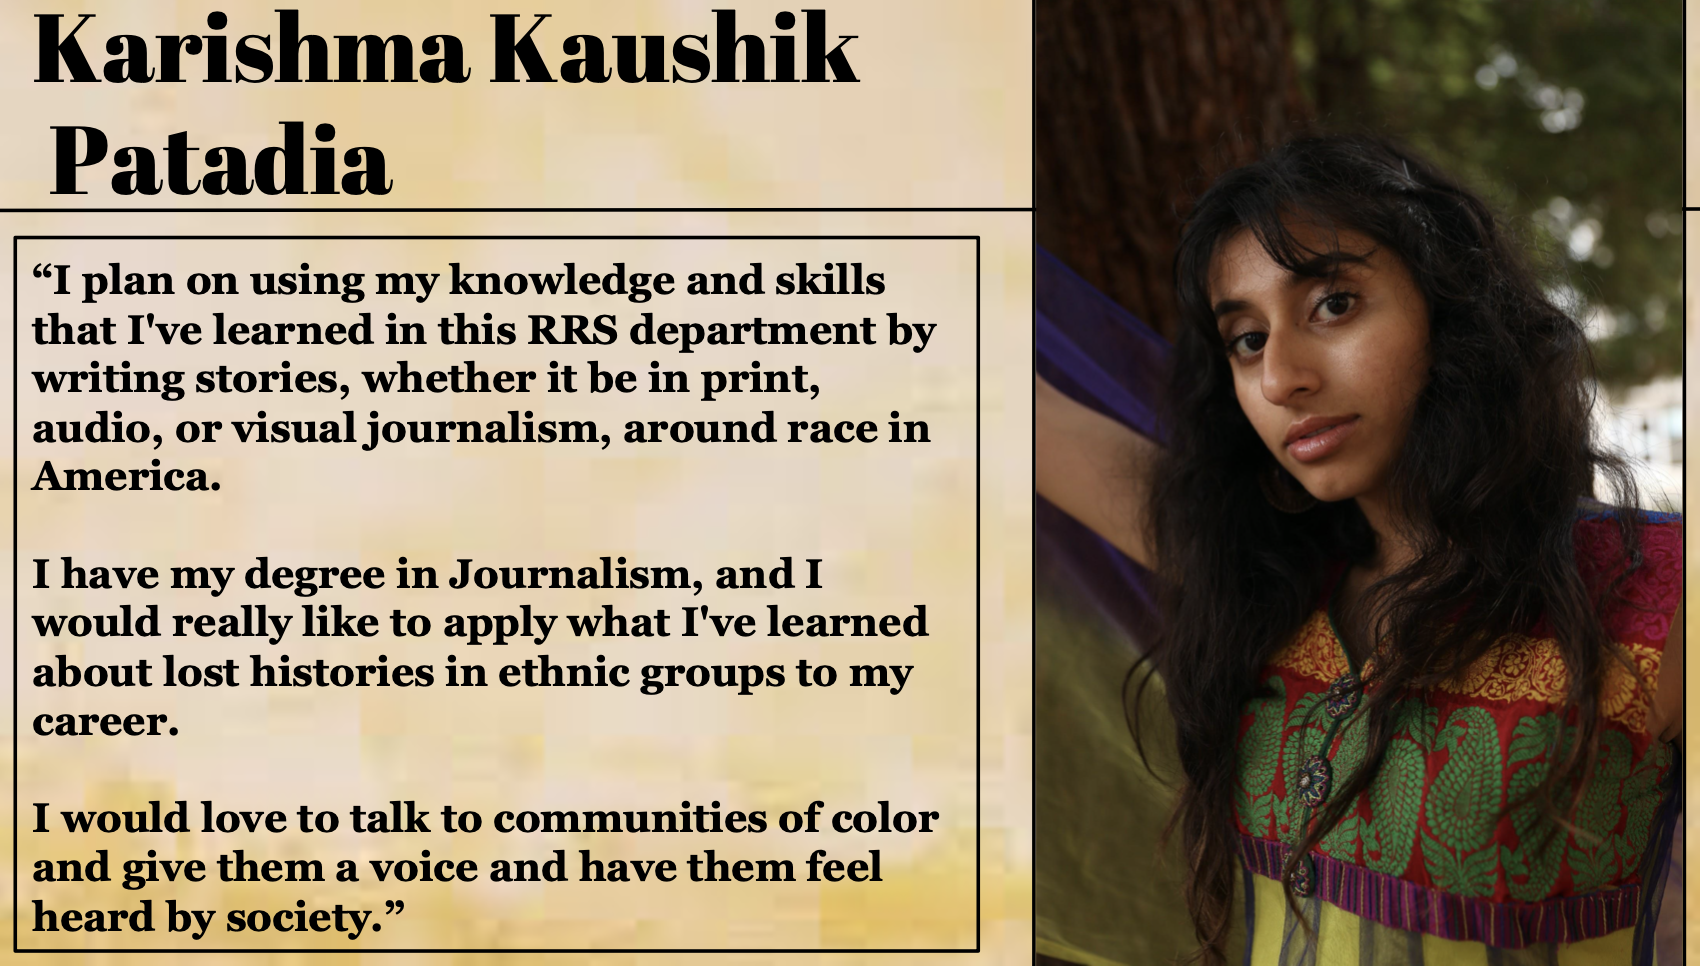 Karishama Kaushik Patadia plans on using her knowledge and skills that I've learned in this RRS department by writing stories, whether it be in print, audio, or visual journalism, around race in America.